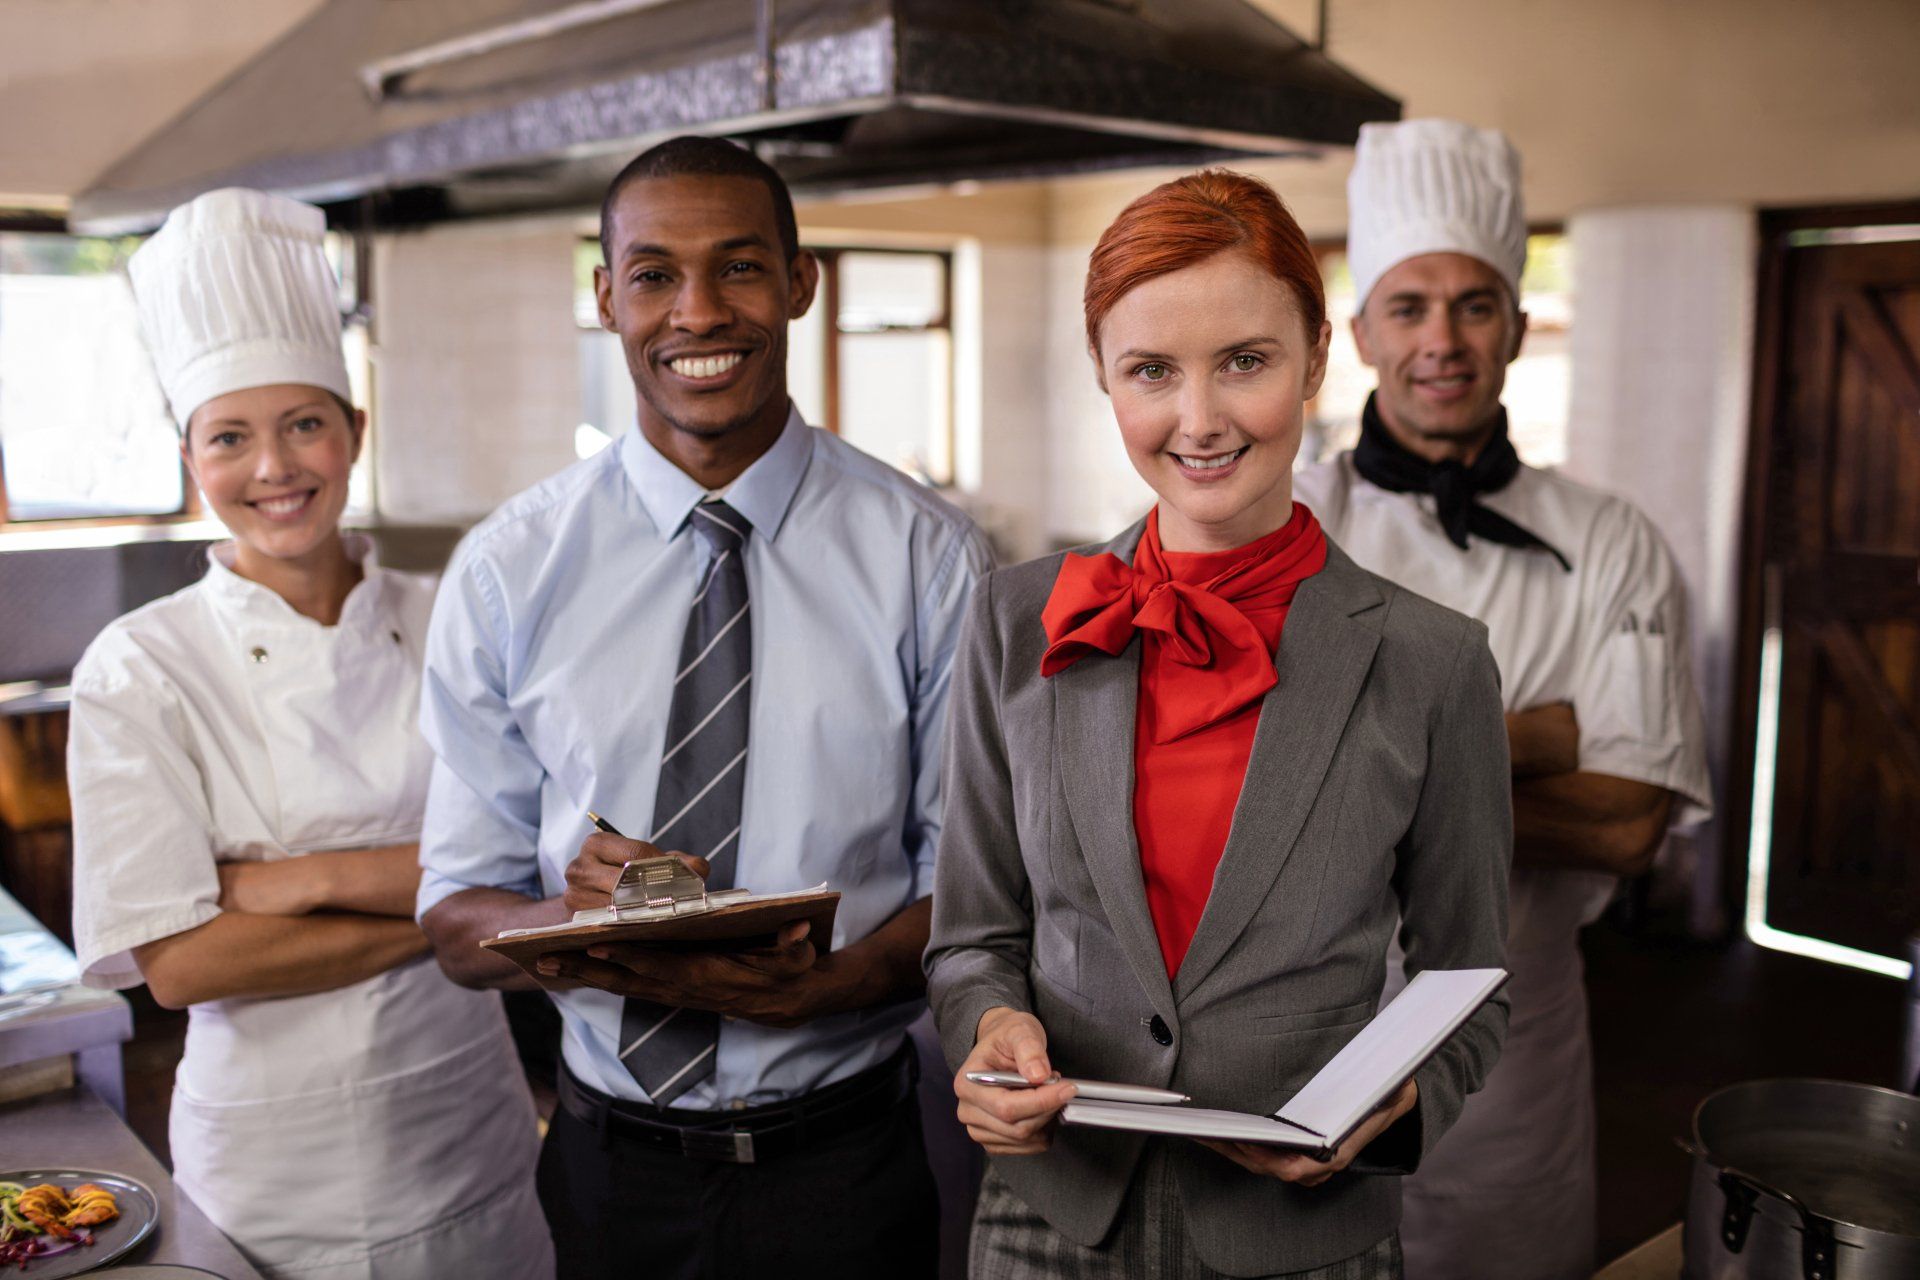 Why Choose IIE HSM To Study Hospitality Management?